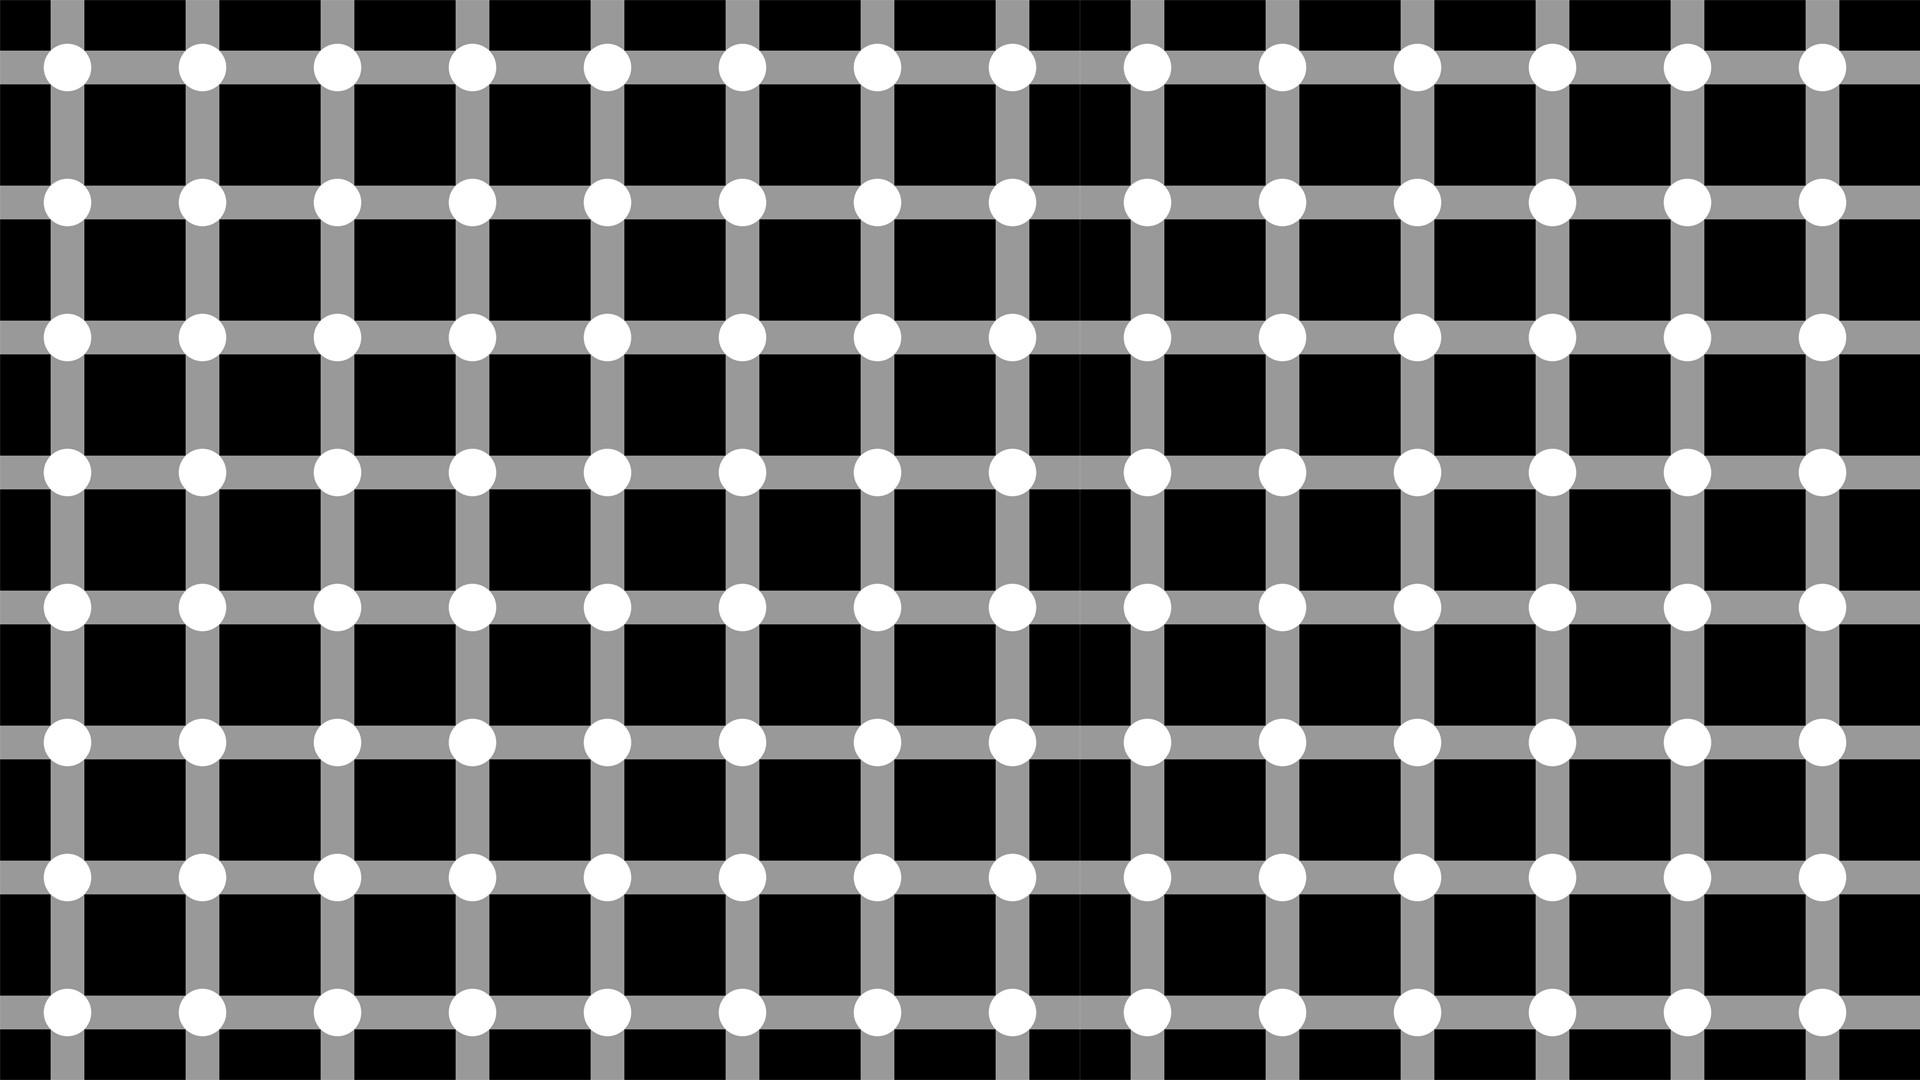 patterns, Textures, Grid, Illusions, Grayscale, Optical, Illusions, Grid, Illusion Wallpaper